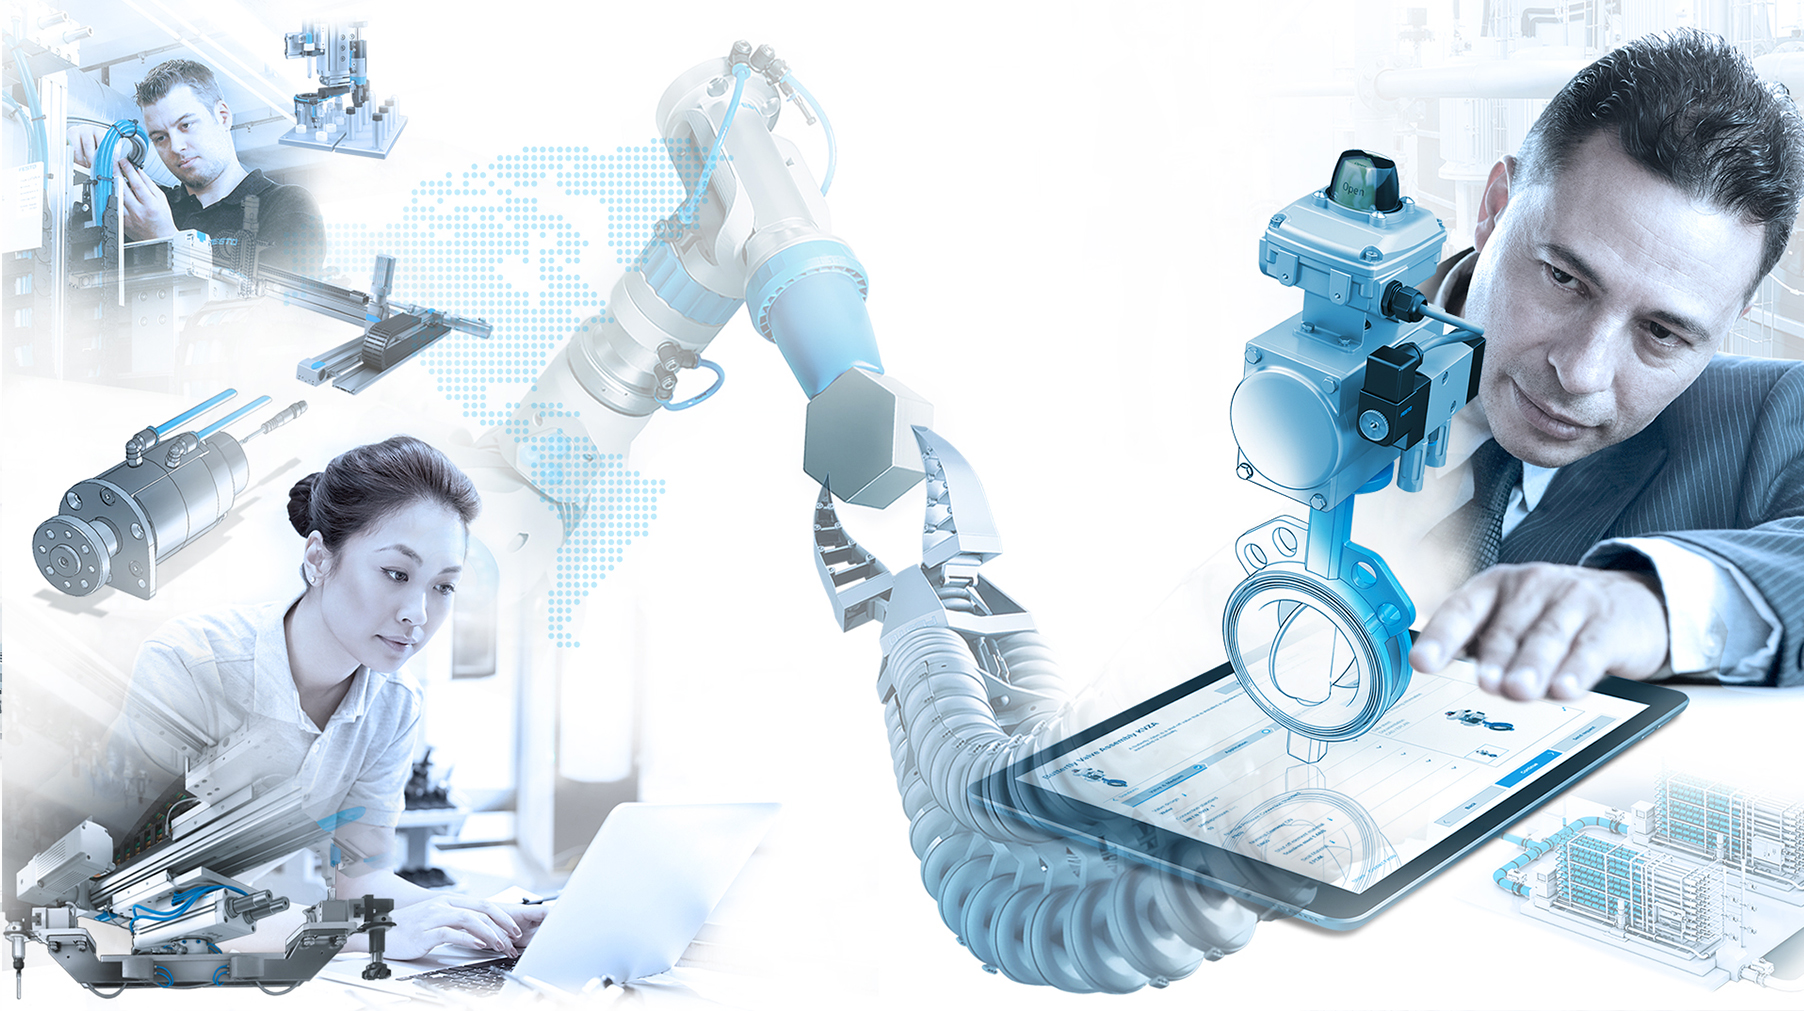 Register For Our Free Upcoming Virtual Trade Show—the Festo Experience